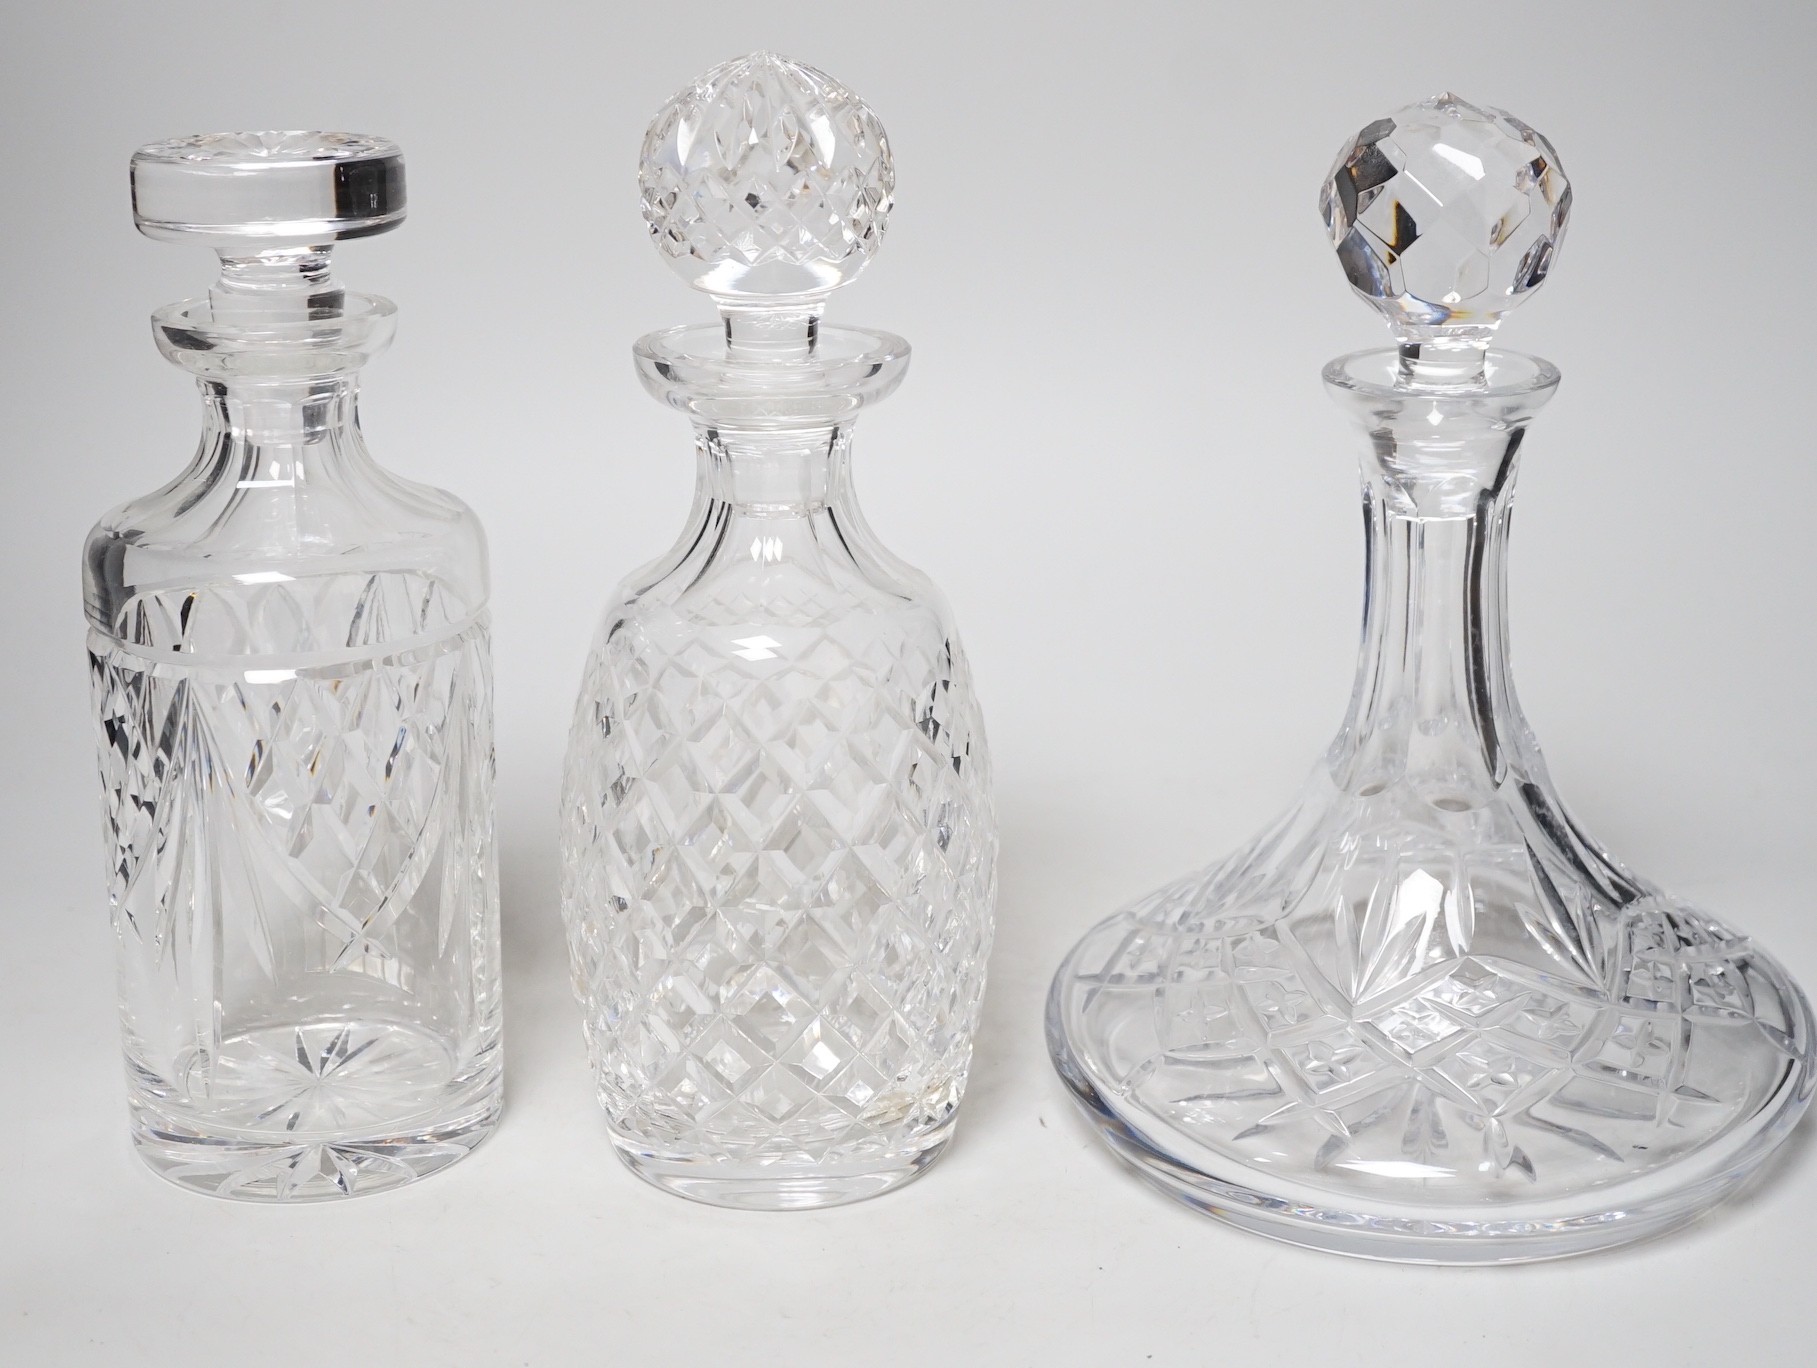 Two Waterford decanters and a lead crystal ship's decanter